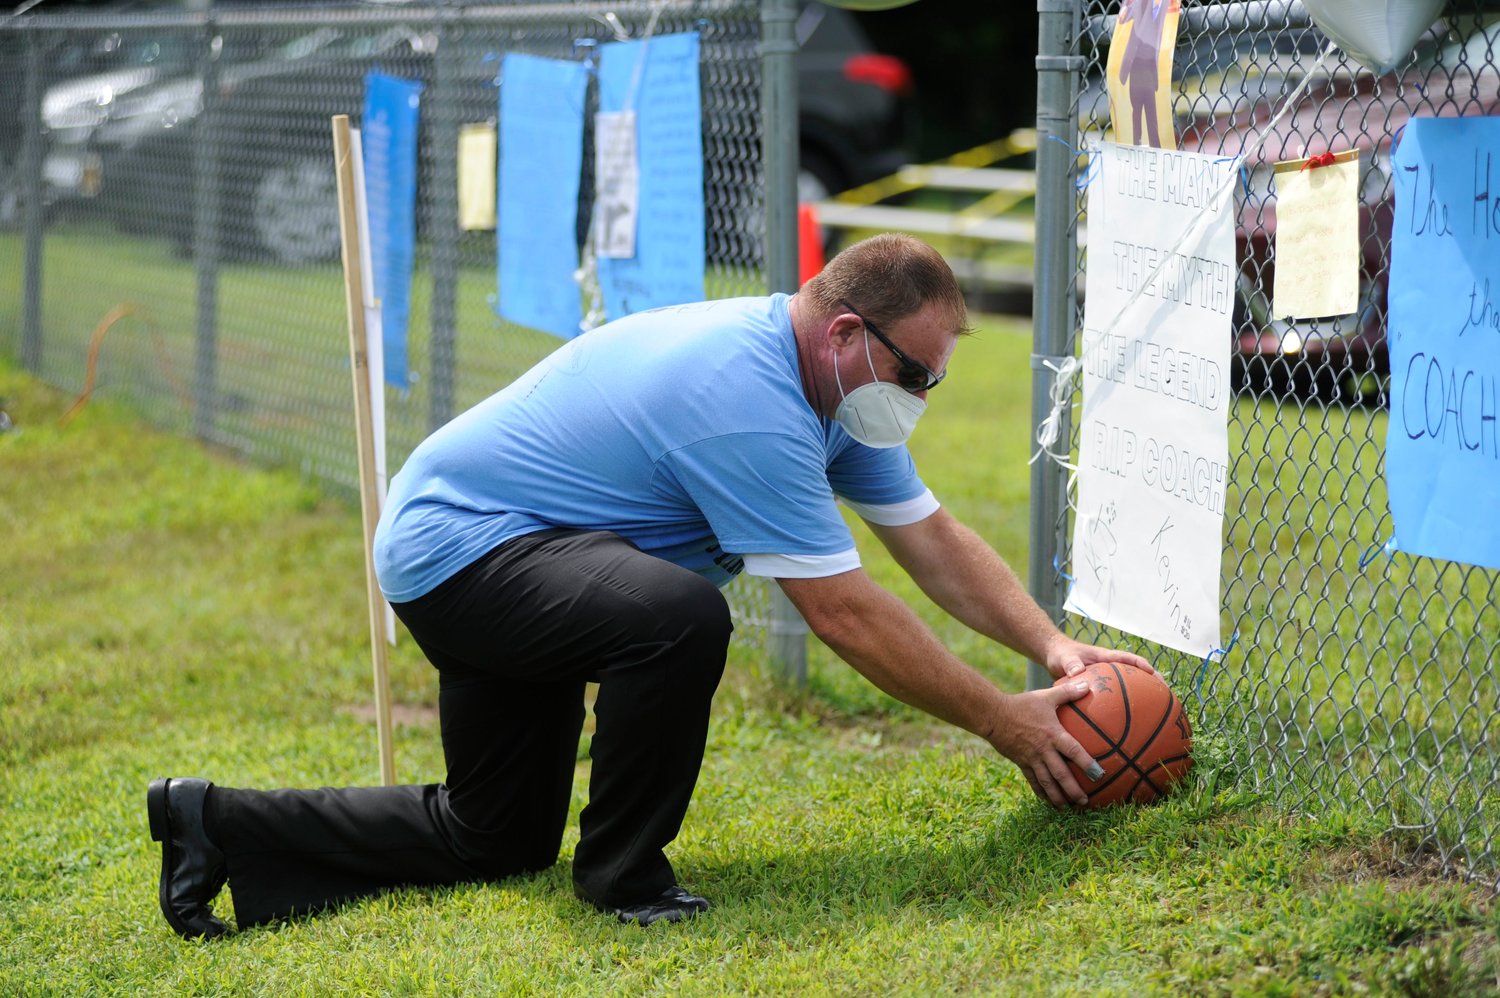 In memoriam. Roscoe’s Class of ’84 Kevin Feeney places a basketball labeled “We Love You Coach” on the grass beneath a sign he made that reads “The man, The Myth, The Legend. R.I.P. Coach”.